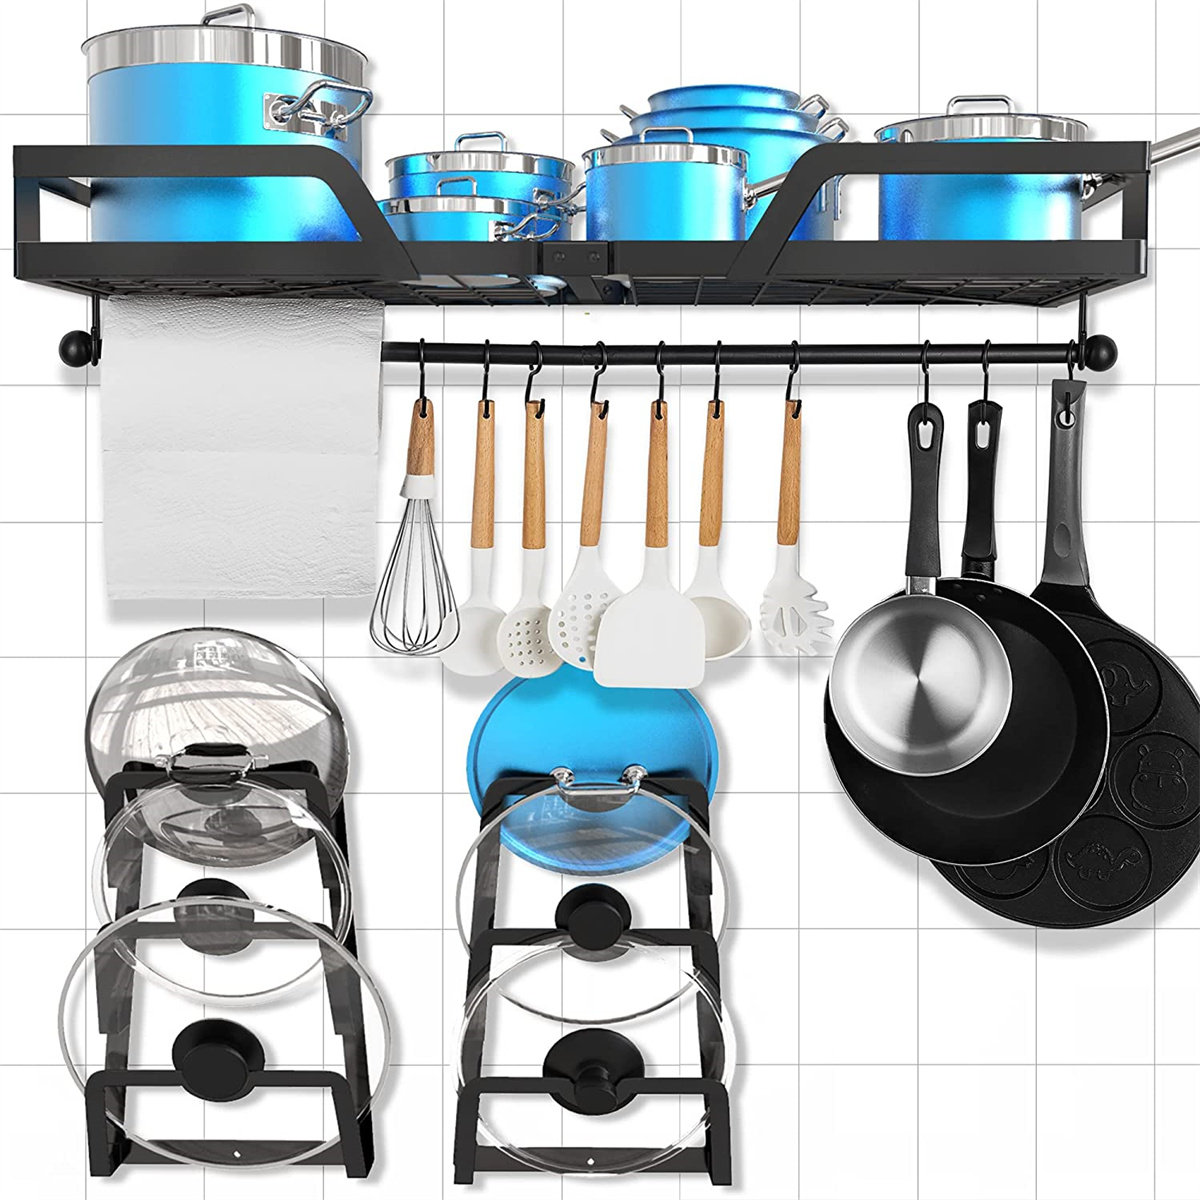 Rebrilliant Metal Straight Wall Mounted Pot Rack & Reviews